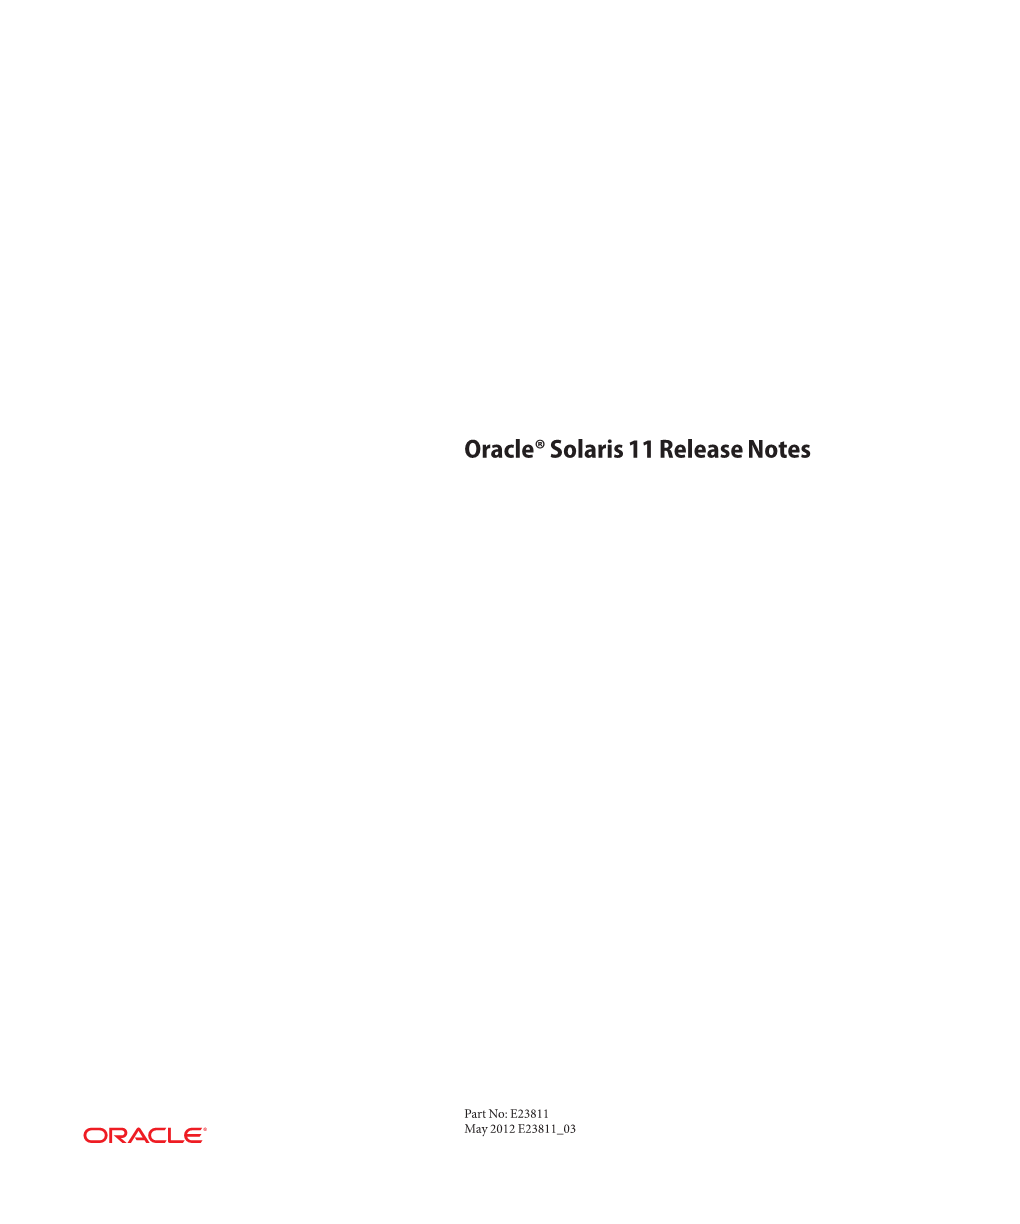 Oracle Solaris 11 Release Notes • May 2012 E23811 03 Contents